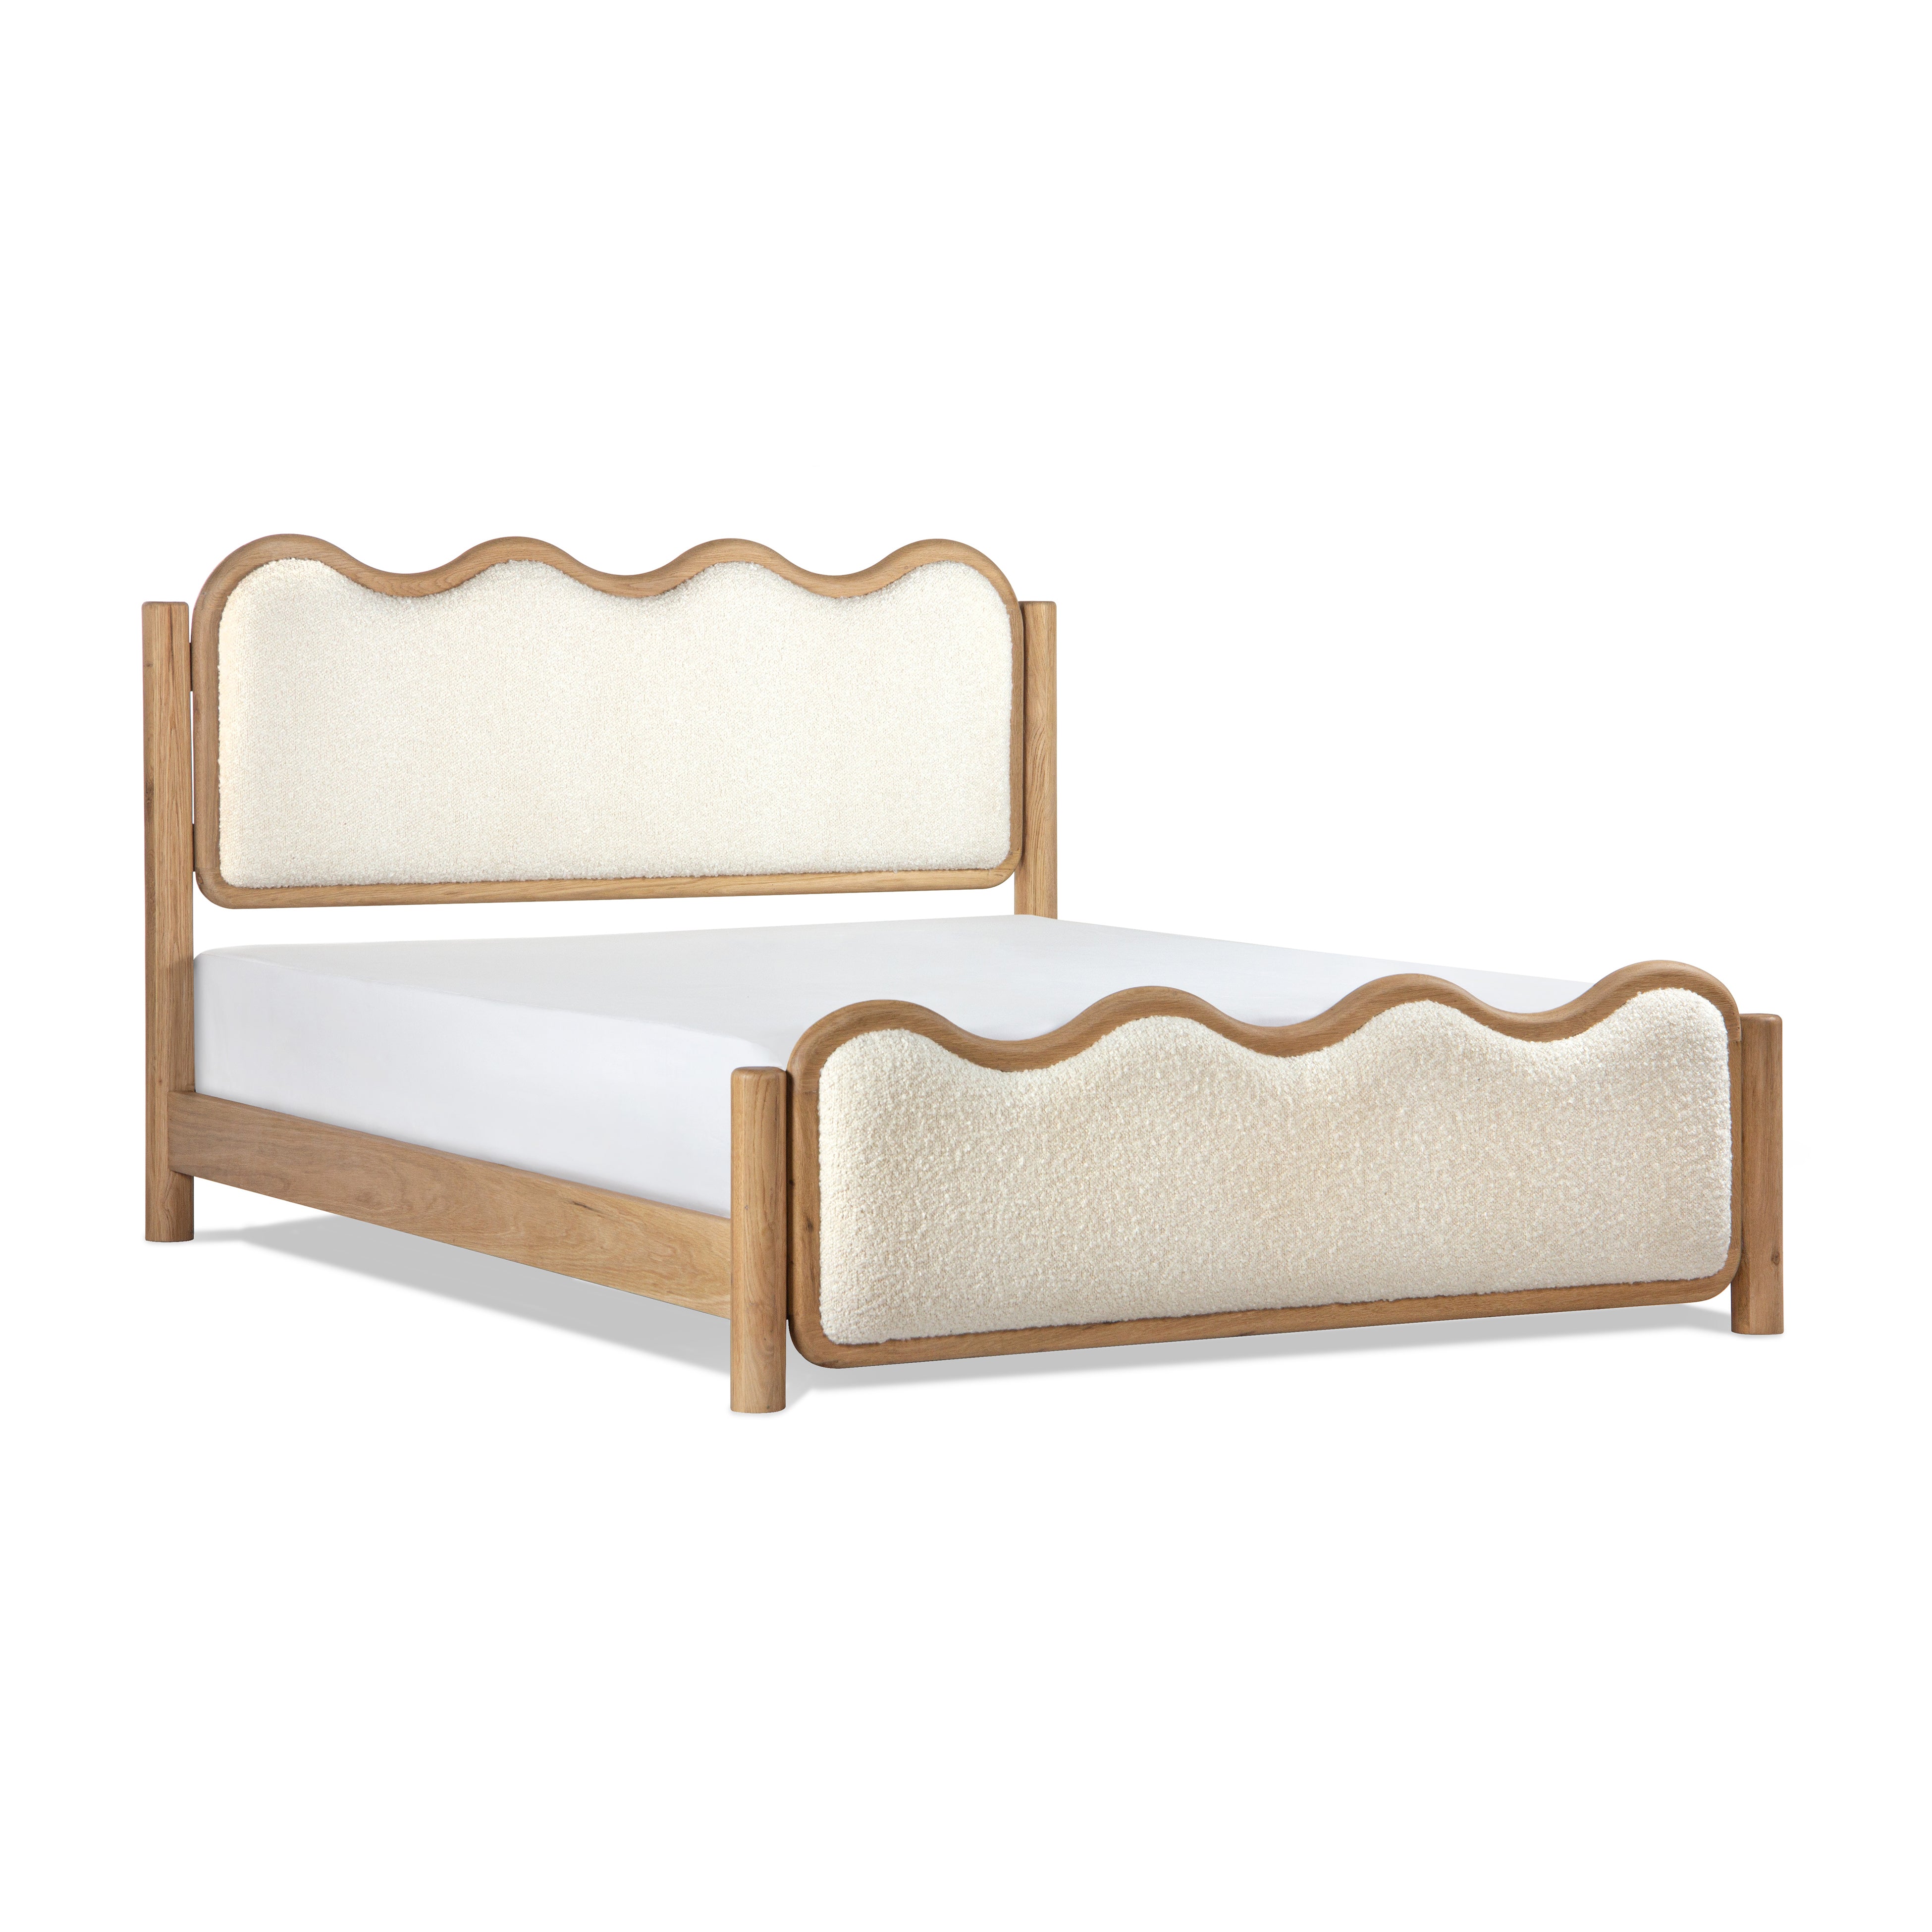 Union Home, Swirl Queen Bed